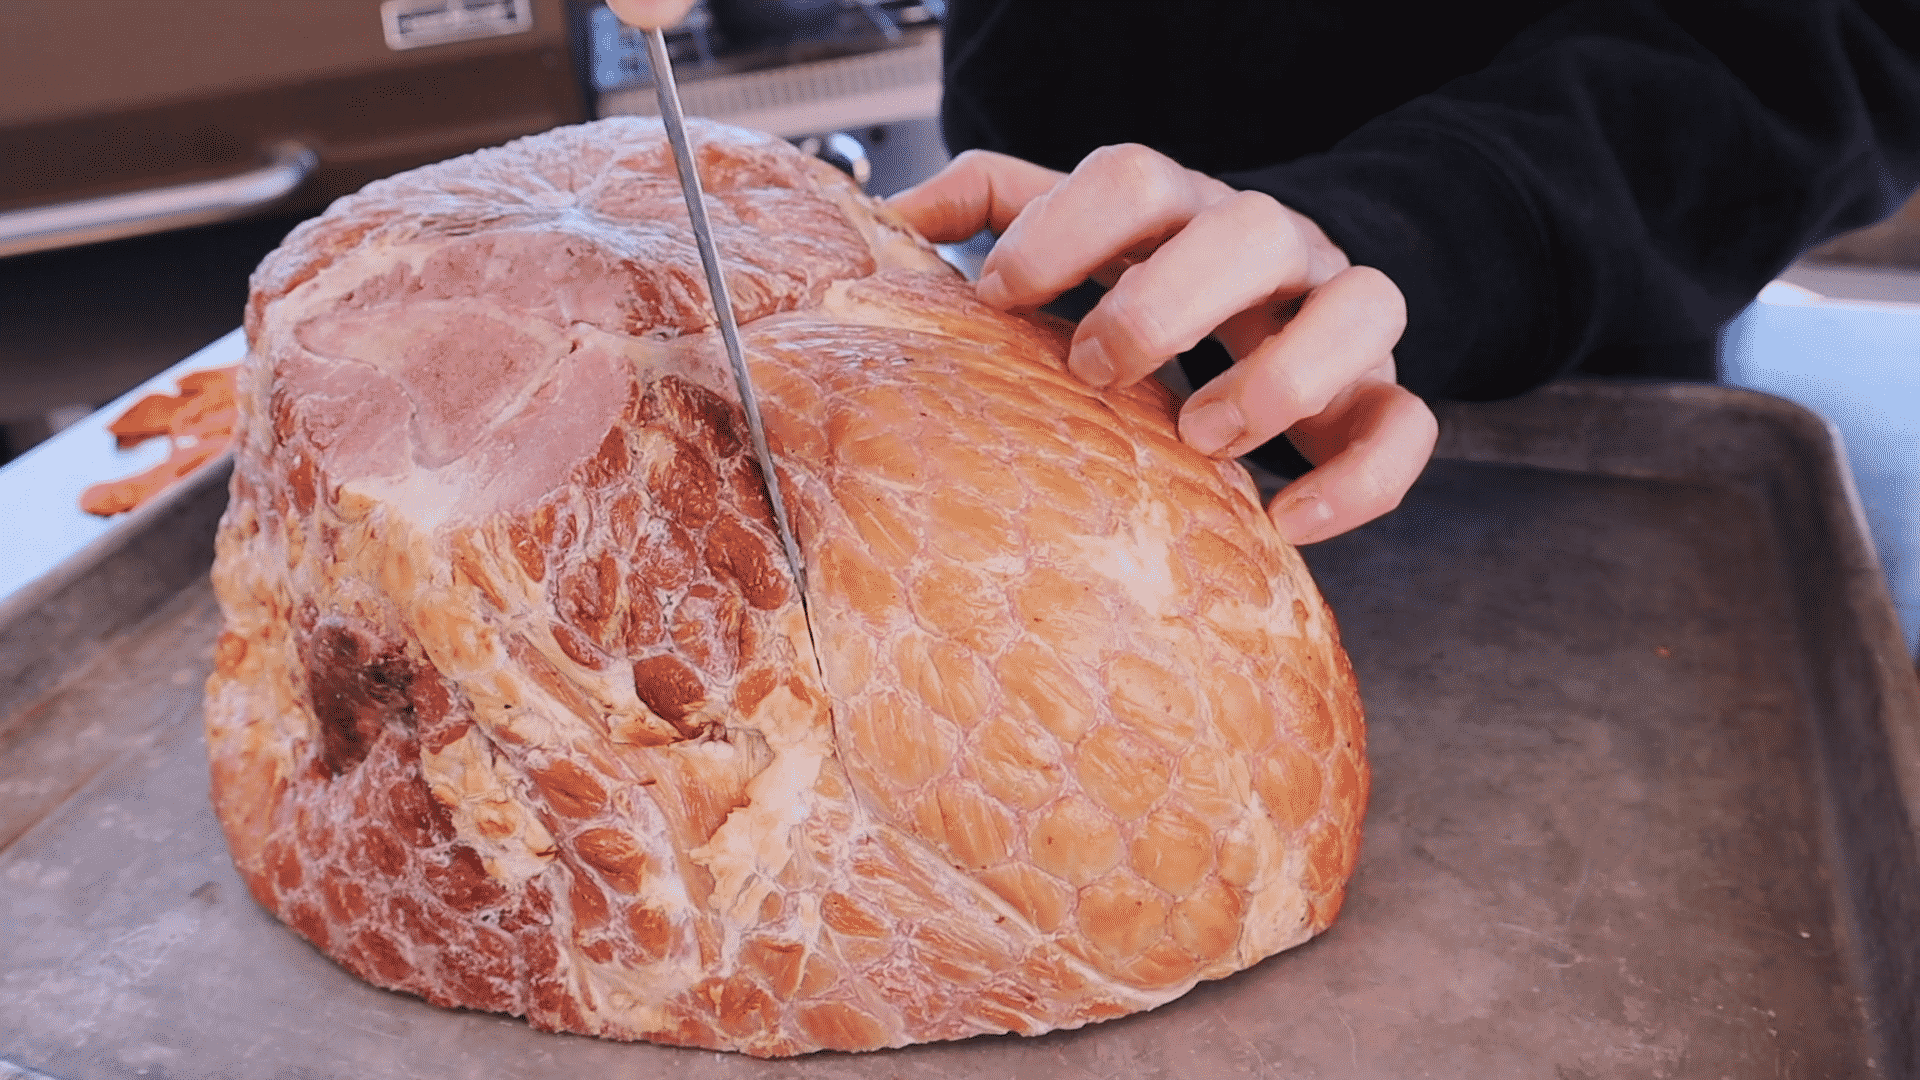 Susie uses a paring knife to make score marks across the surface of a whole picnic ham.